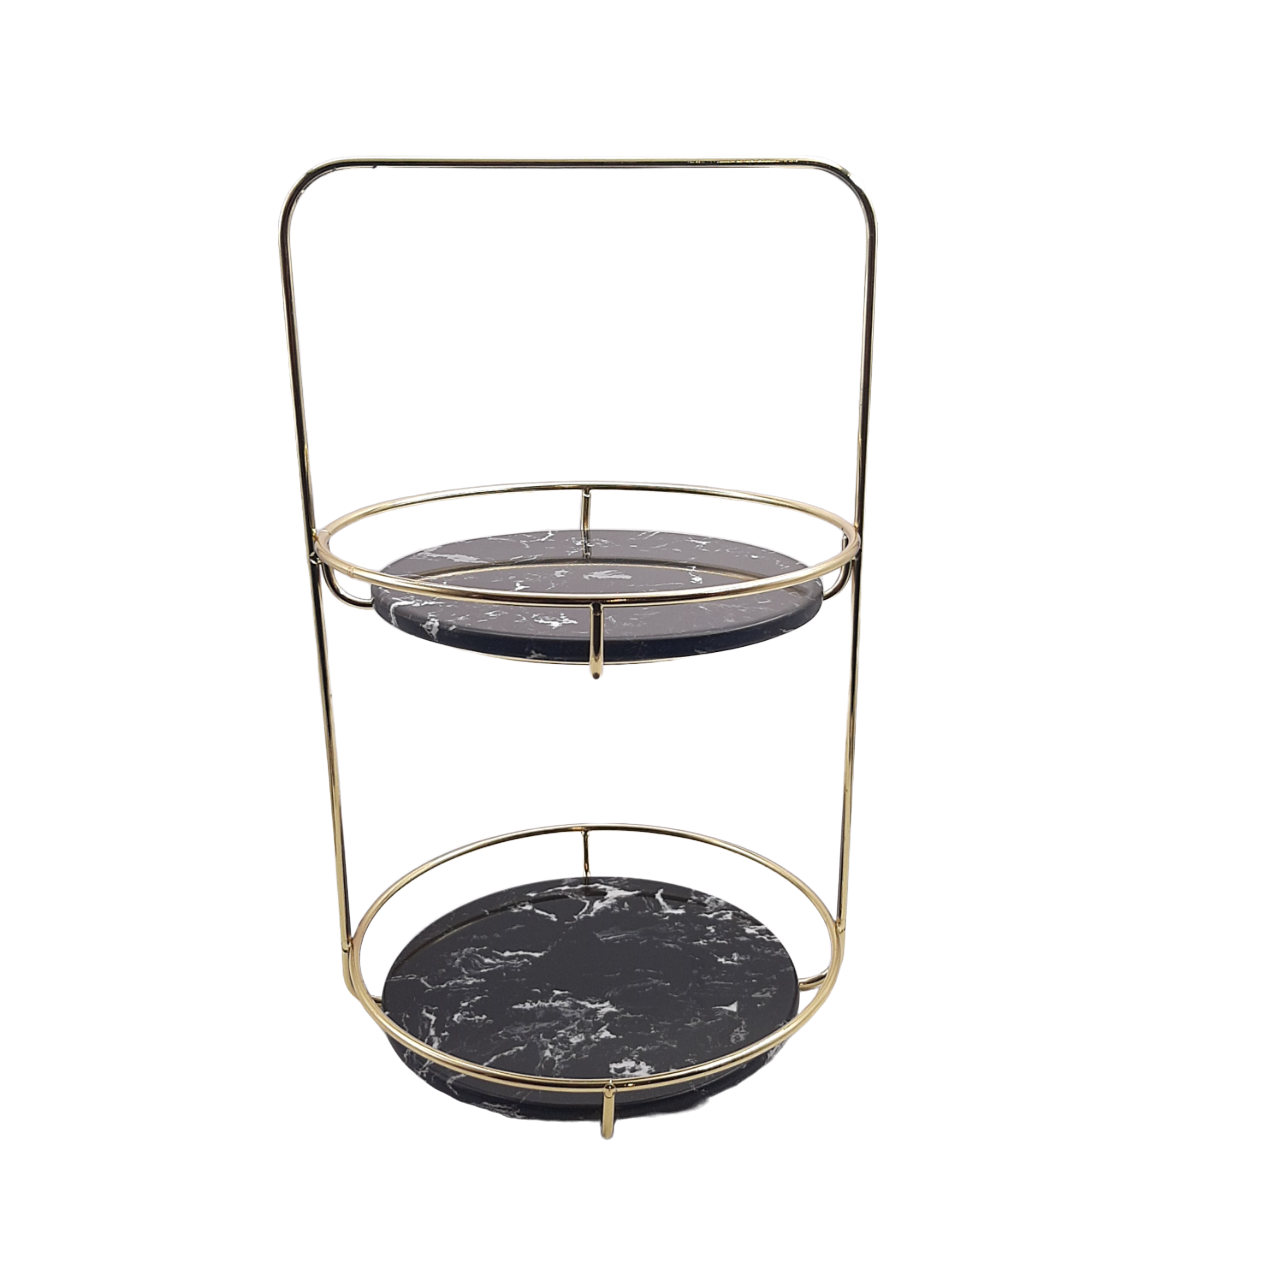 Two Tier Round Display-Organiser